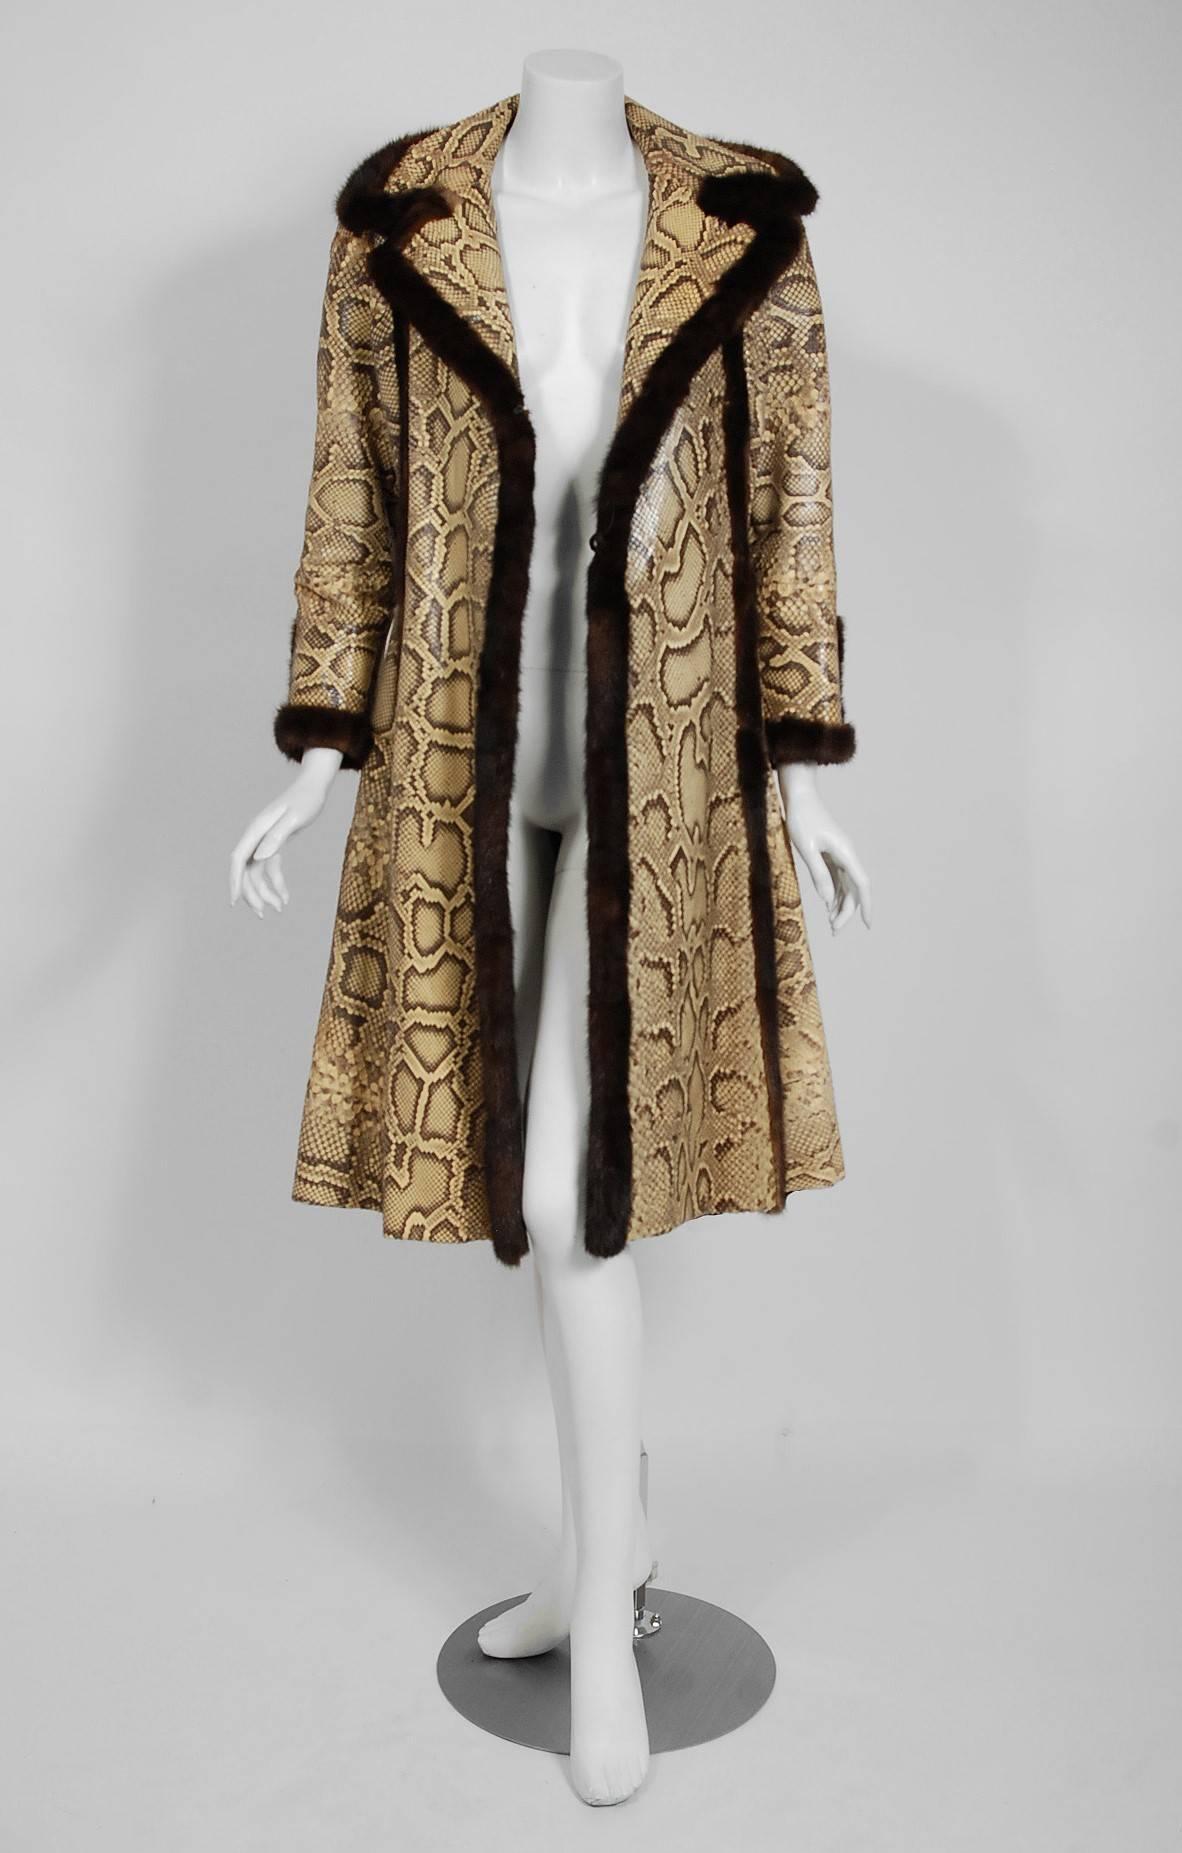 A stunning custom couture 1970's tailored princess coat in the most fabulous genuine python snakeskin and mink fur combination.  I love the dramatic wide portrait-collar and lean, long sleeves. Shaped with princess-line seams that flare out below